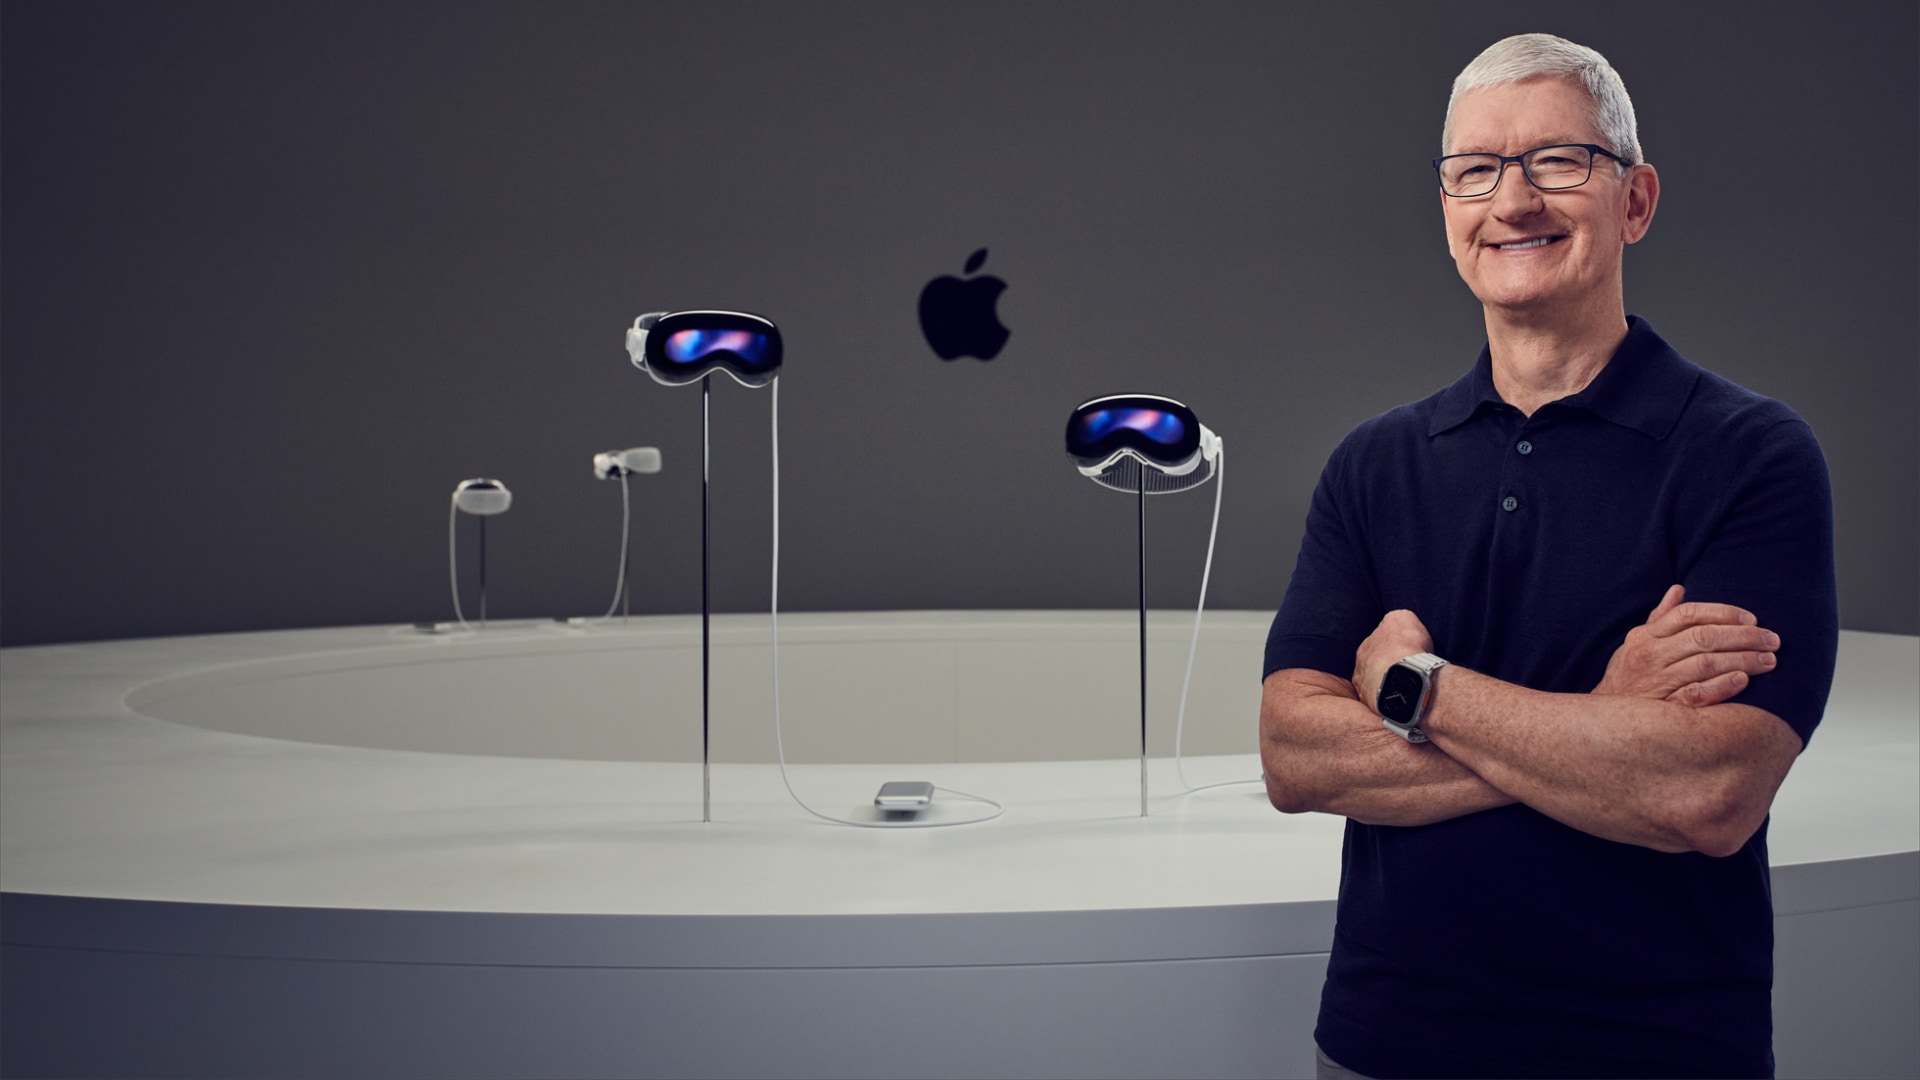 Why doesn’t Tim Cook wear Vision Pro in public? To avoid becoming a meme!